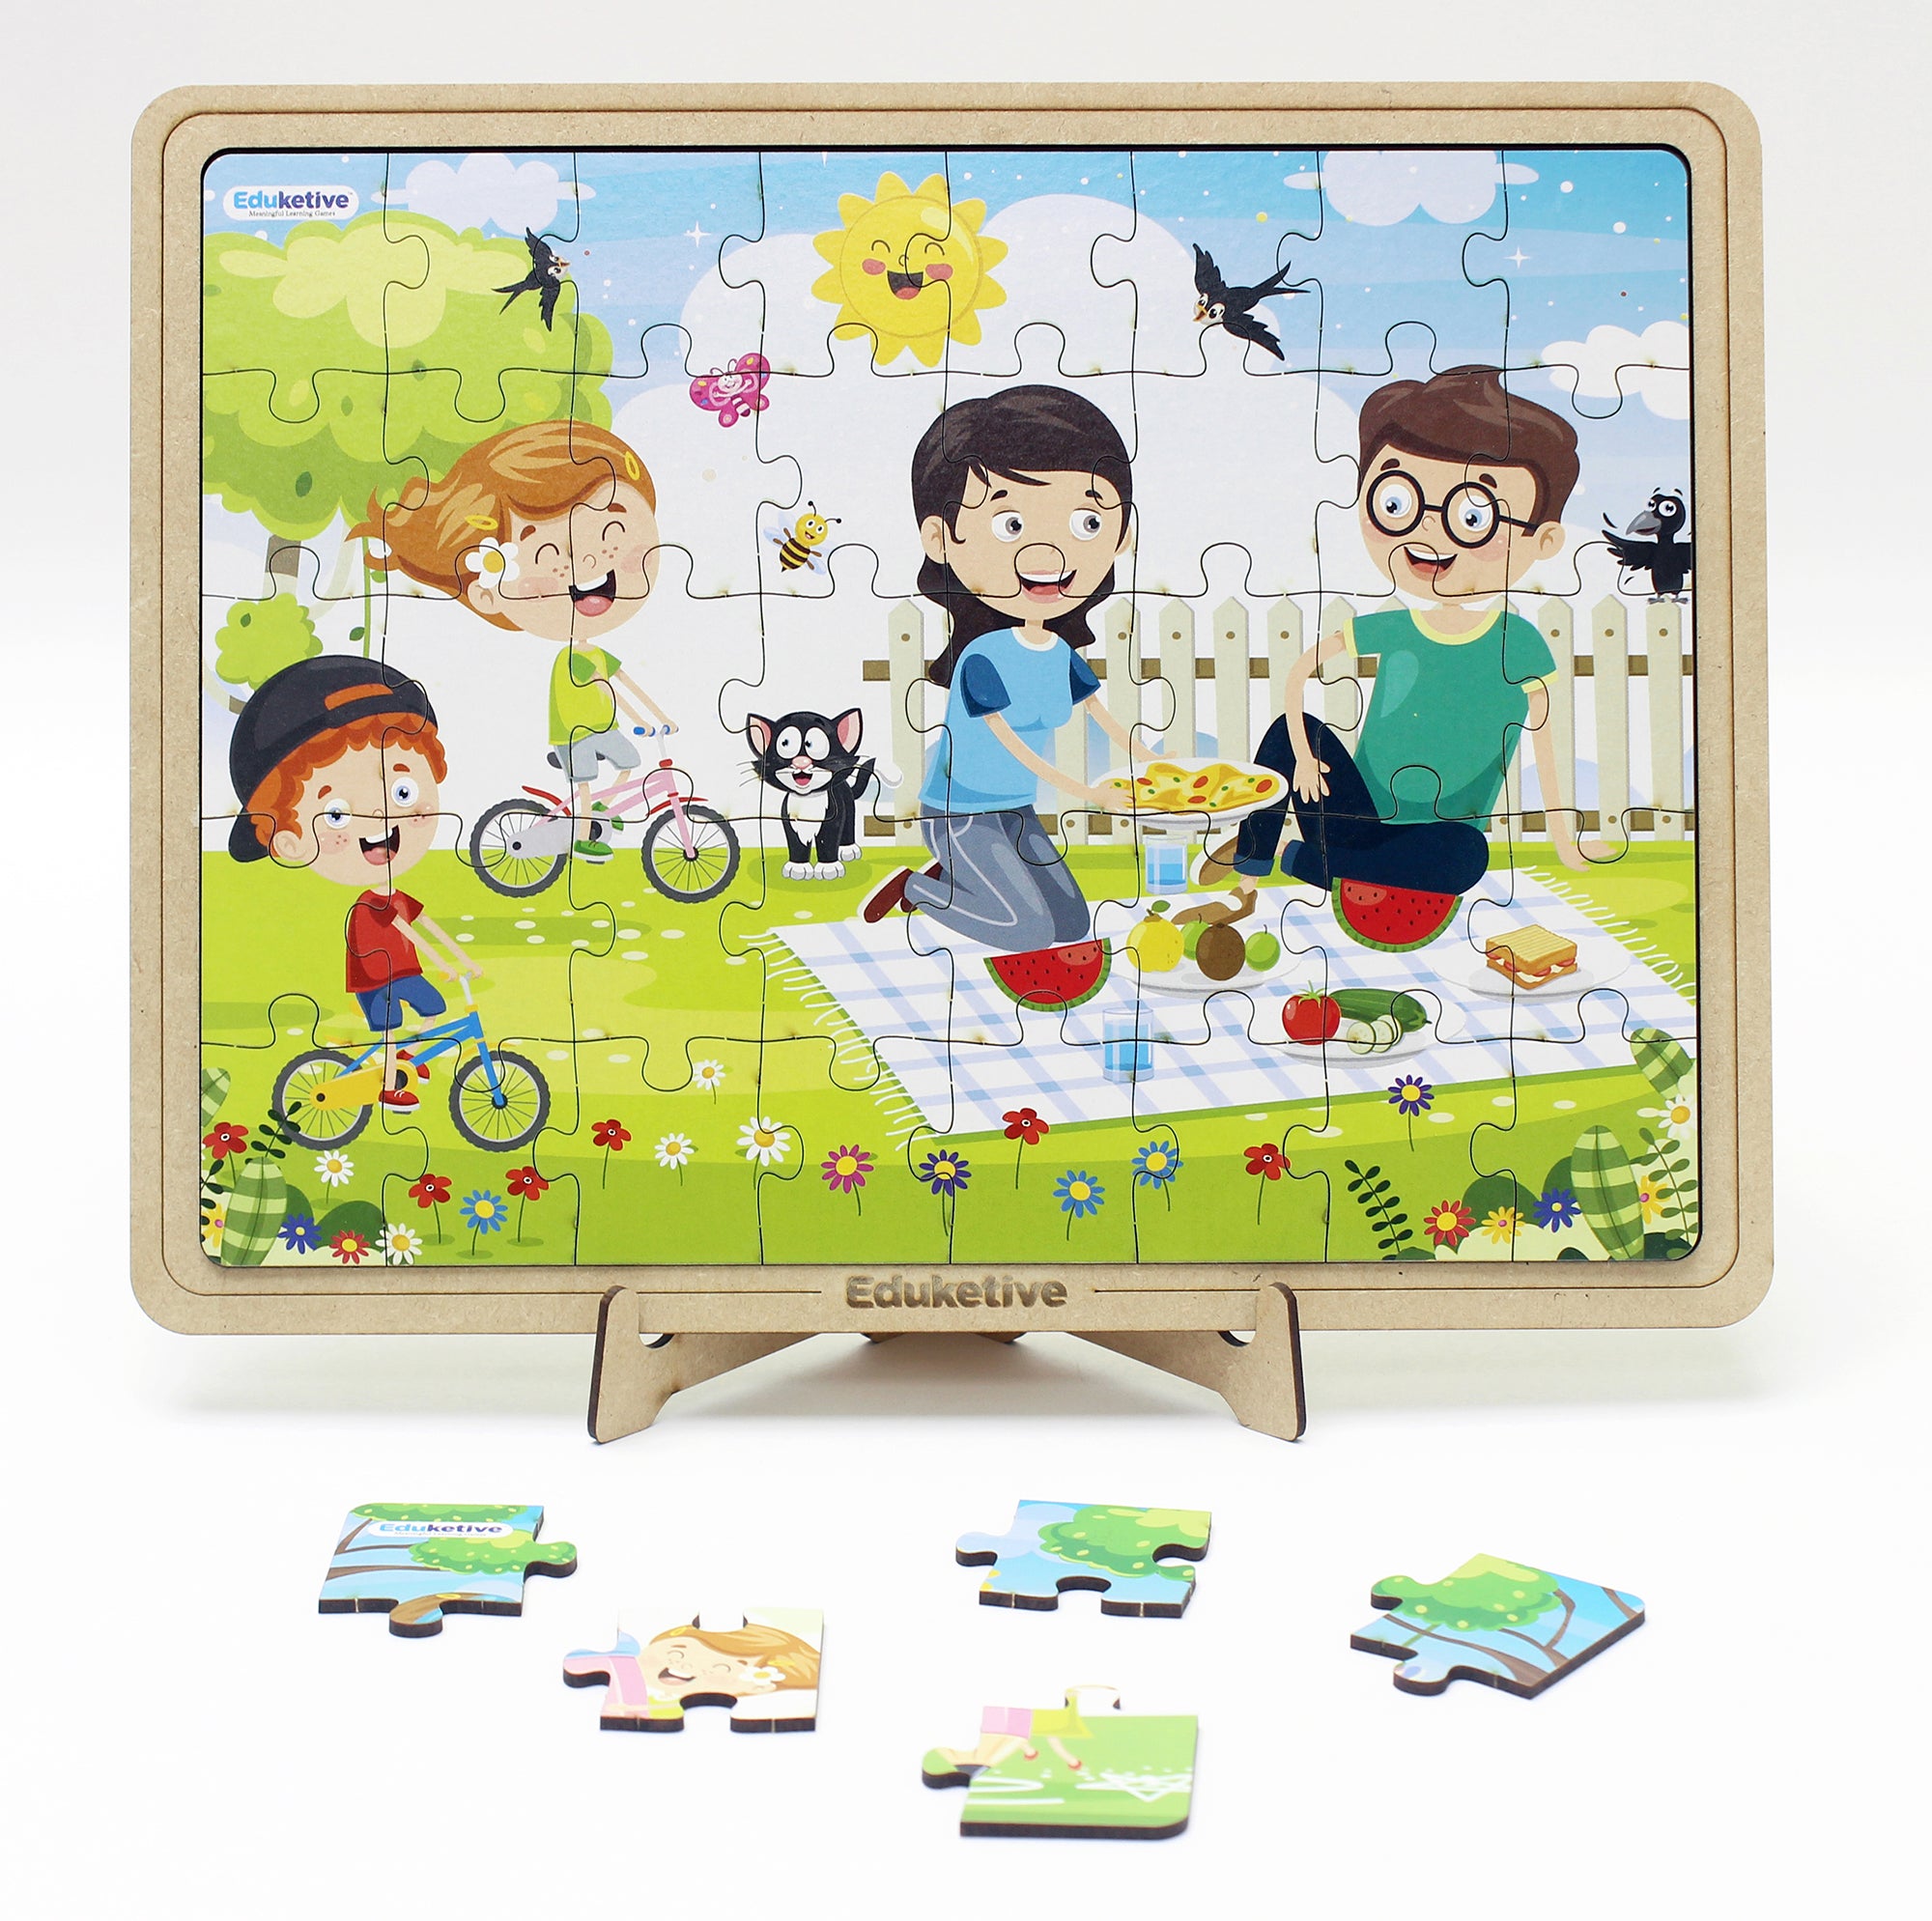 Back to School & Family Time - Combo of 2 - Decorative Jigsaw Puzzle Set | Book Bargain Buy